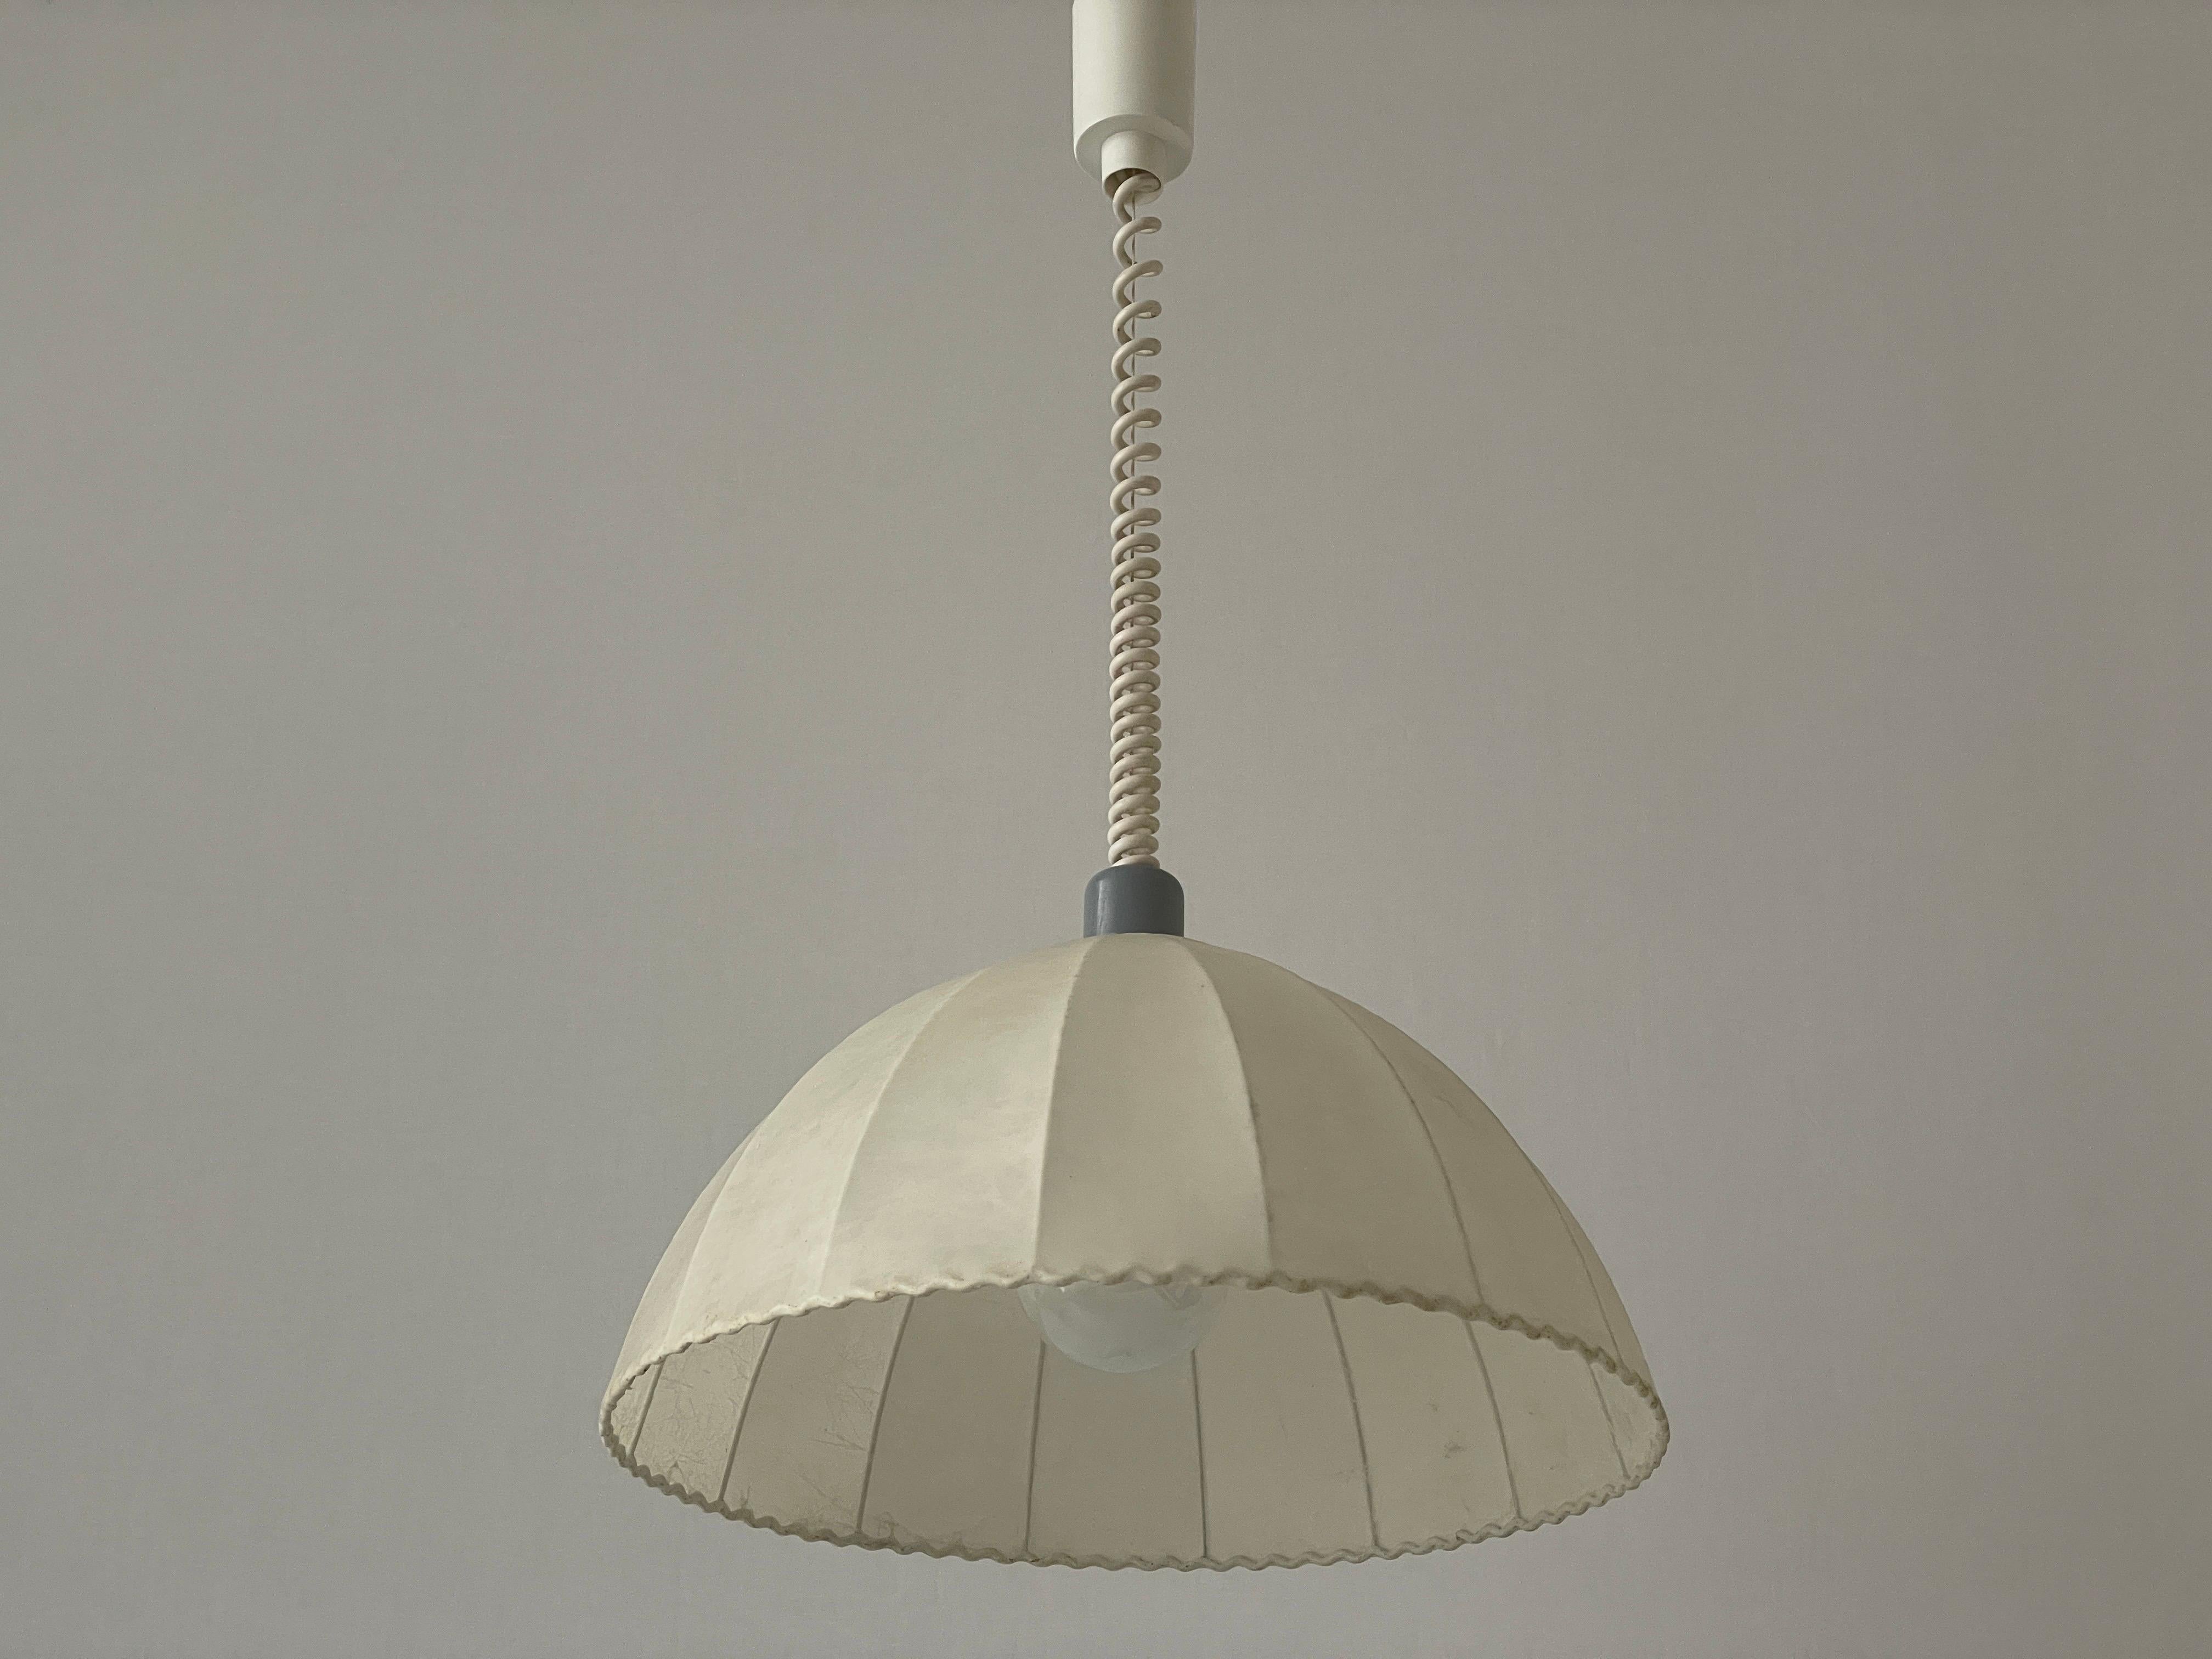 Resin Cocoon Pendant Lamp by Goldkant with Grey Metal Top, 1960s, Germany For Sale